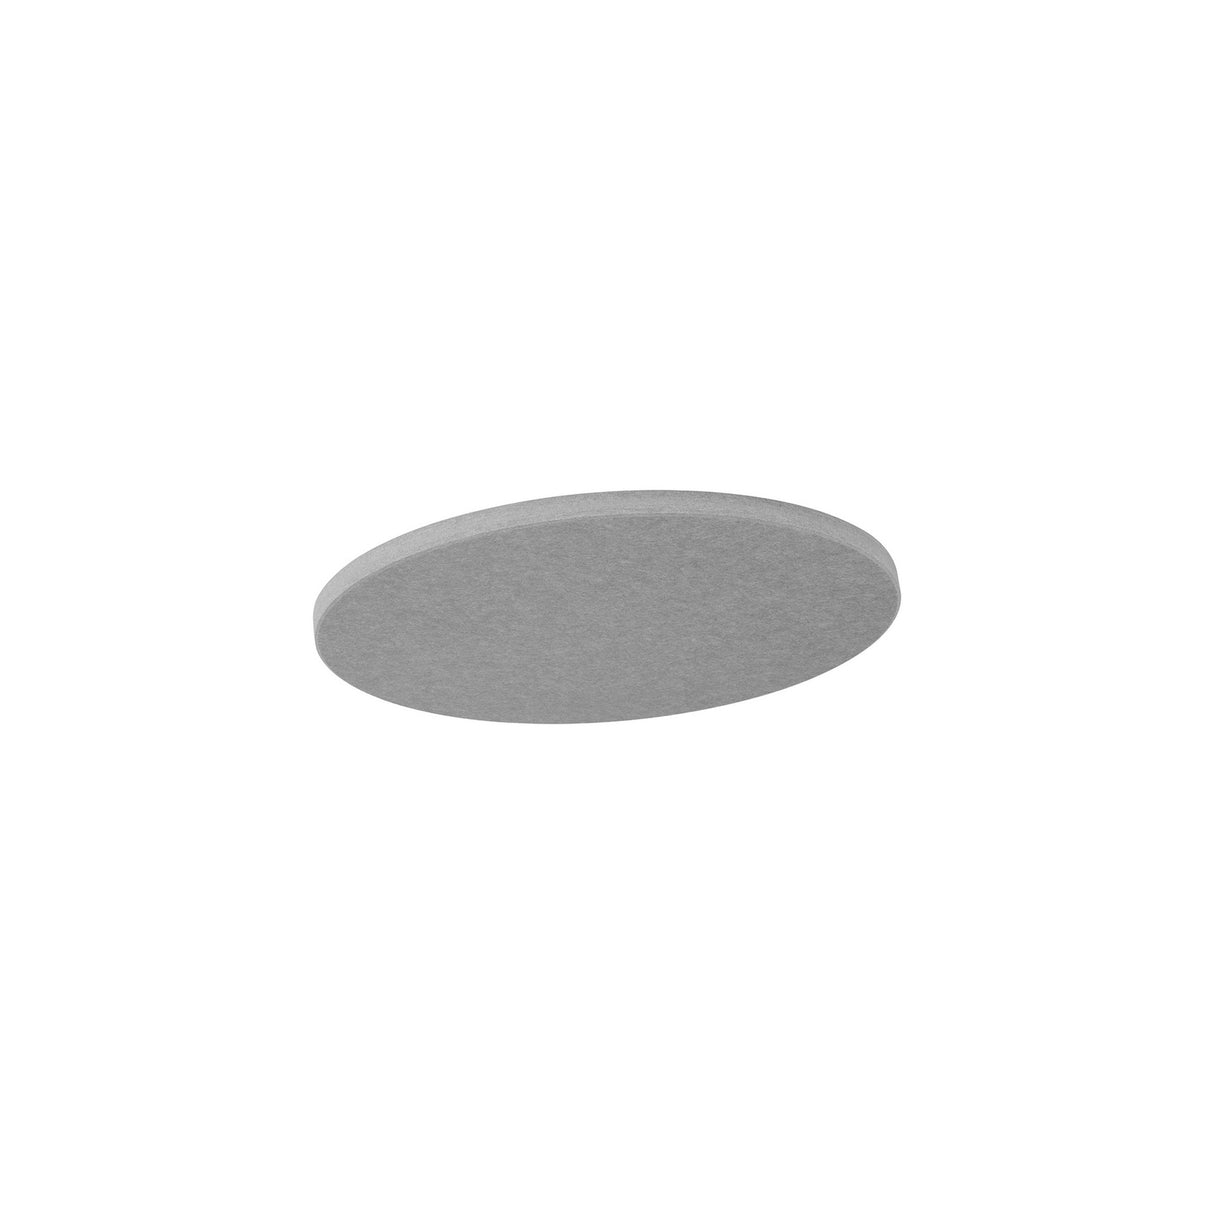 Primacoustic EcoScapes Round Cloud 18-Inch Micro-Beveled Edge Wall Panel, Slate 4-Pack